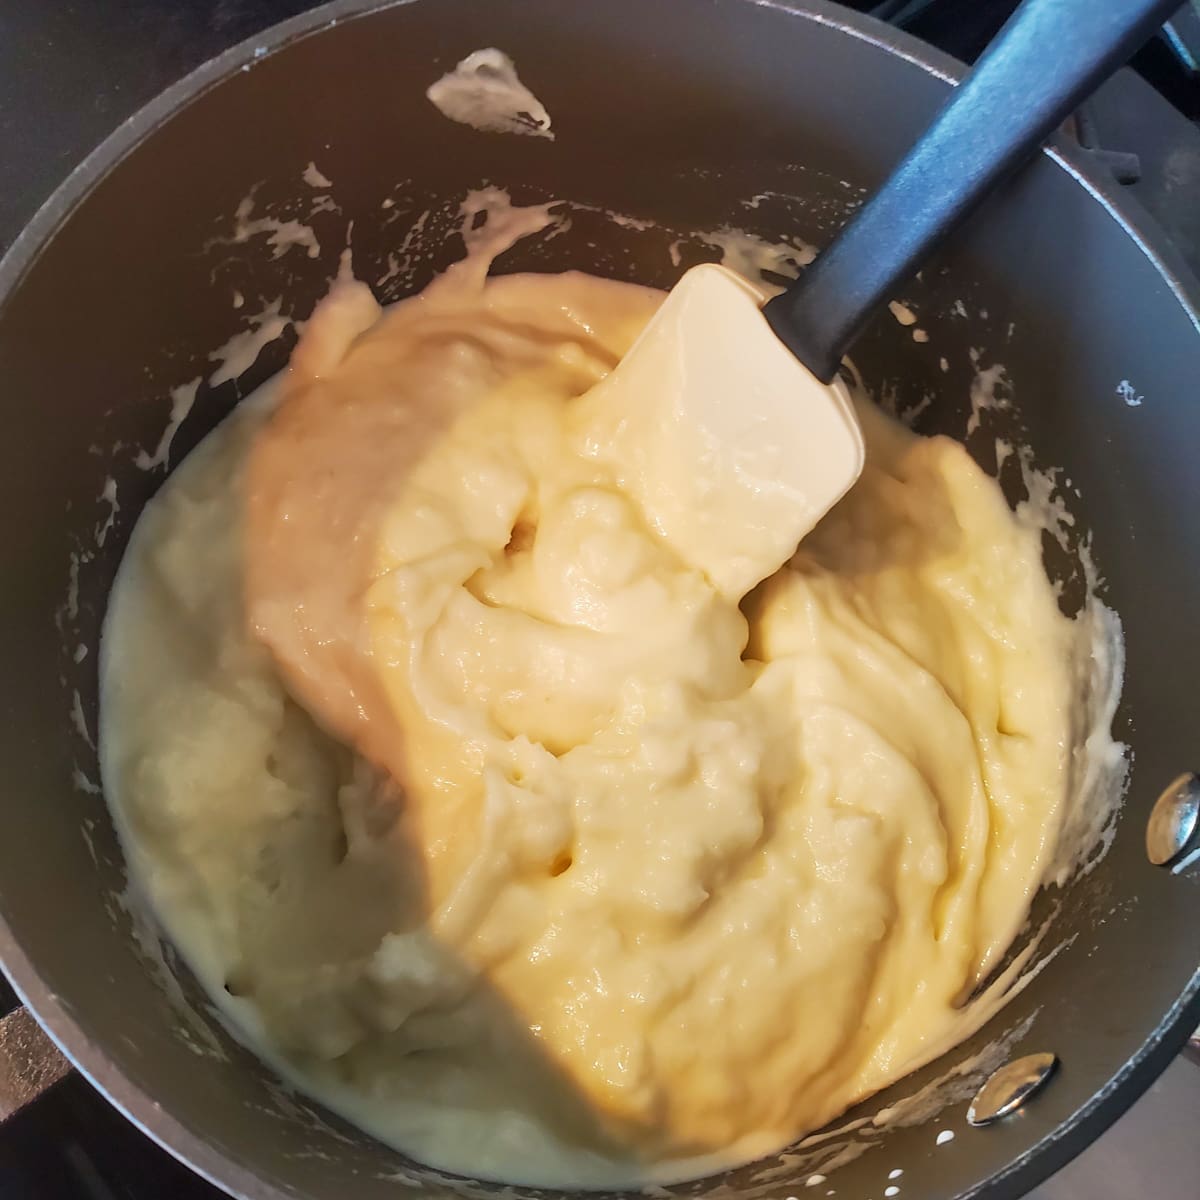 Cream and butter being mixed into mashed potatoes.